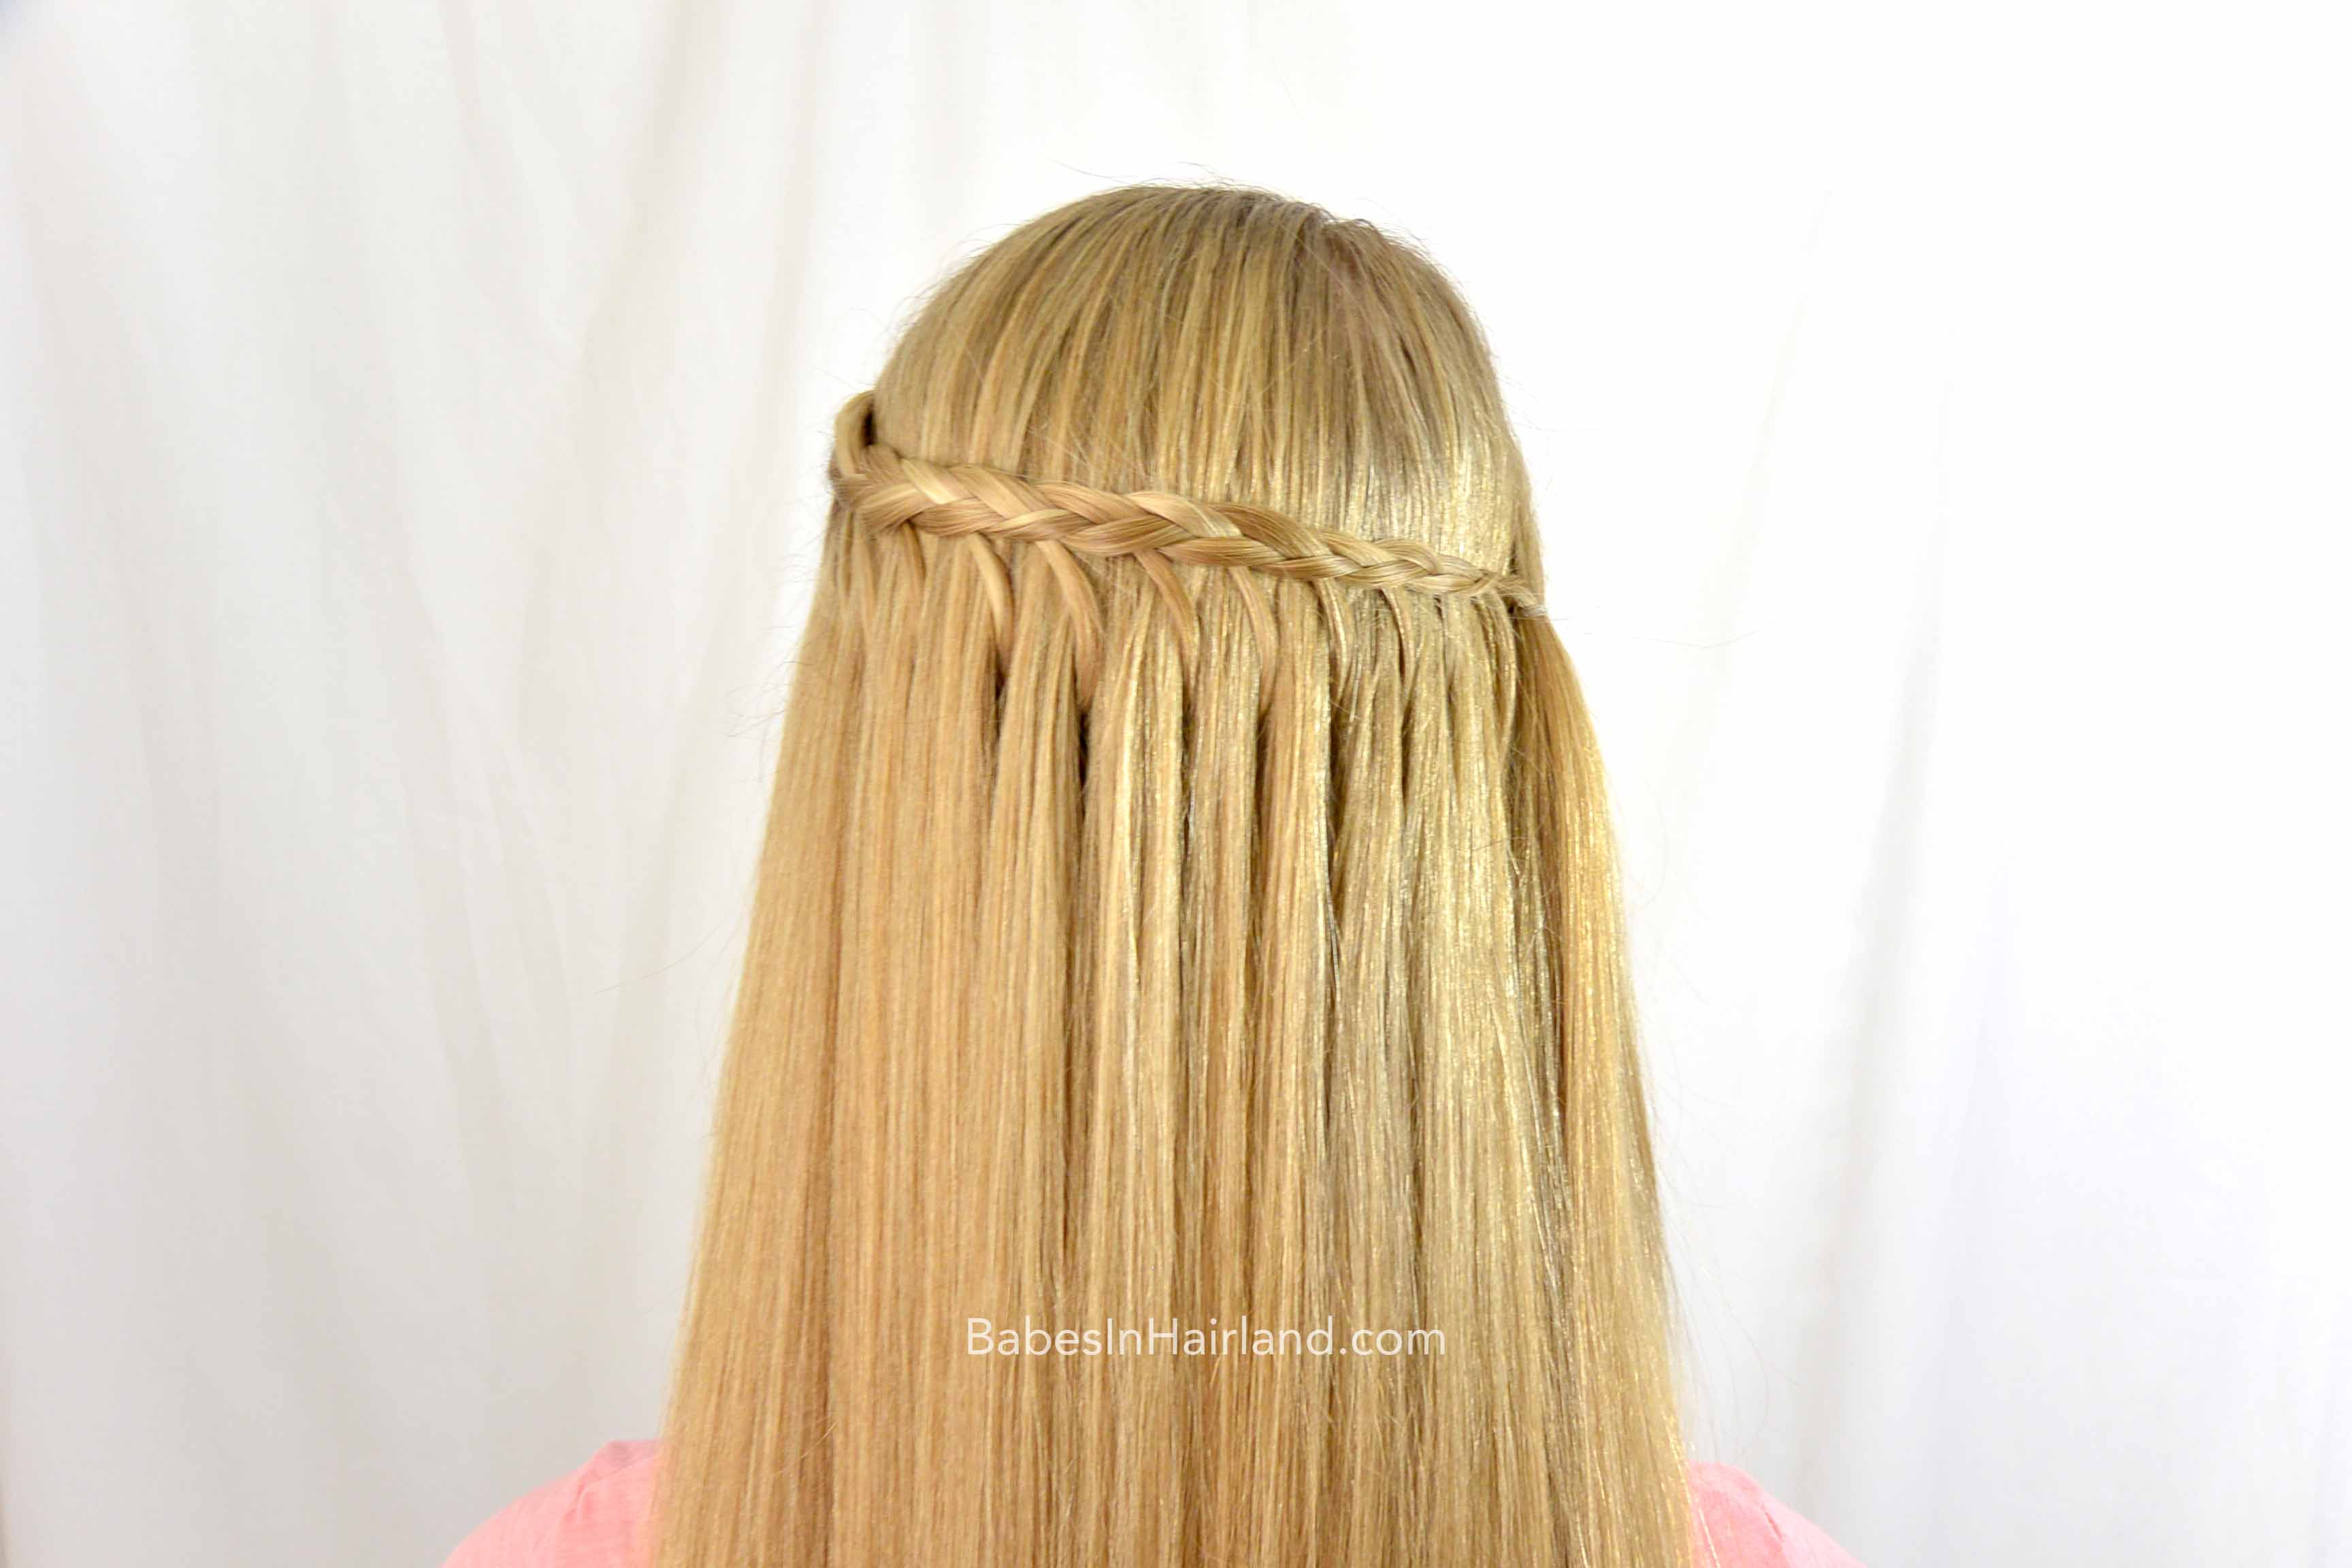 wrapping feather braid from babesinhairland